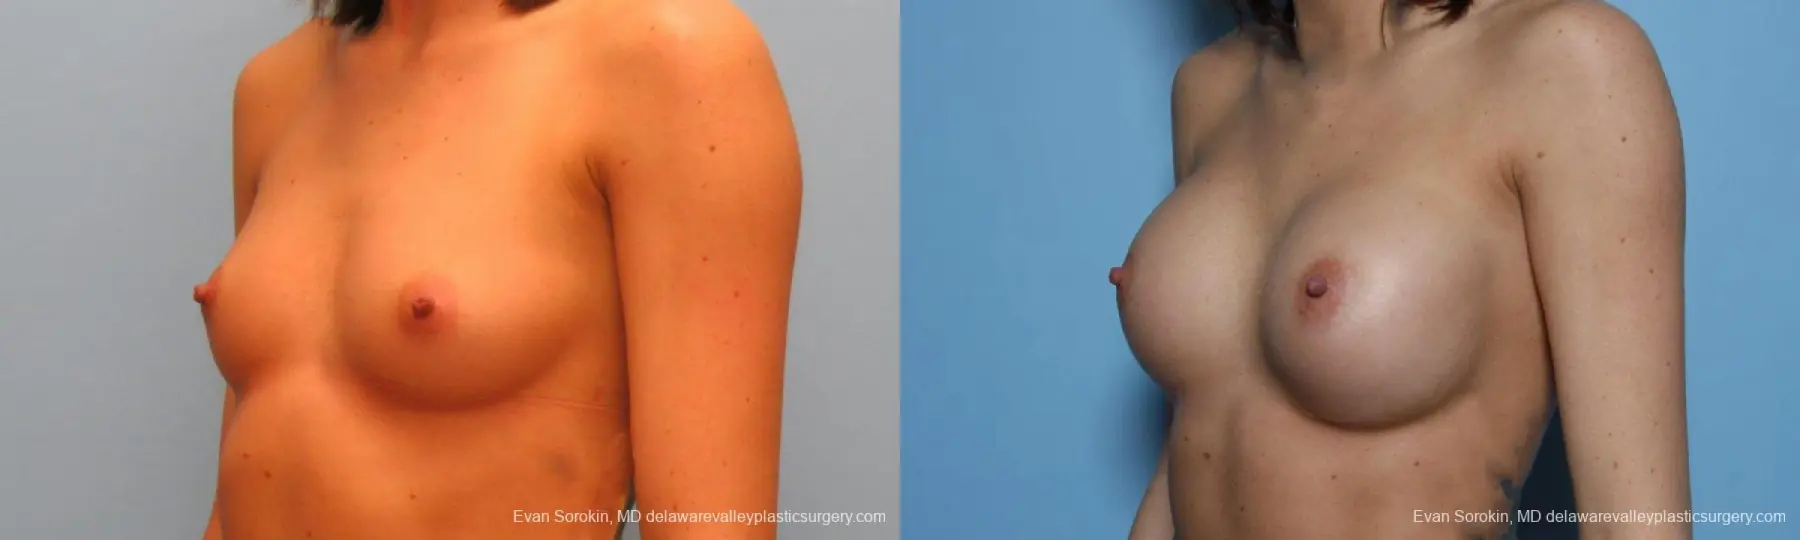 Philadelphia Breast Augmentation 9421 - Before and After 4